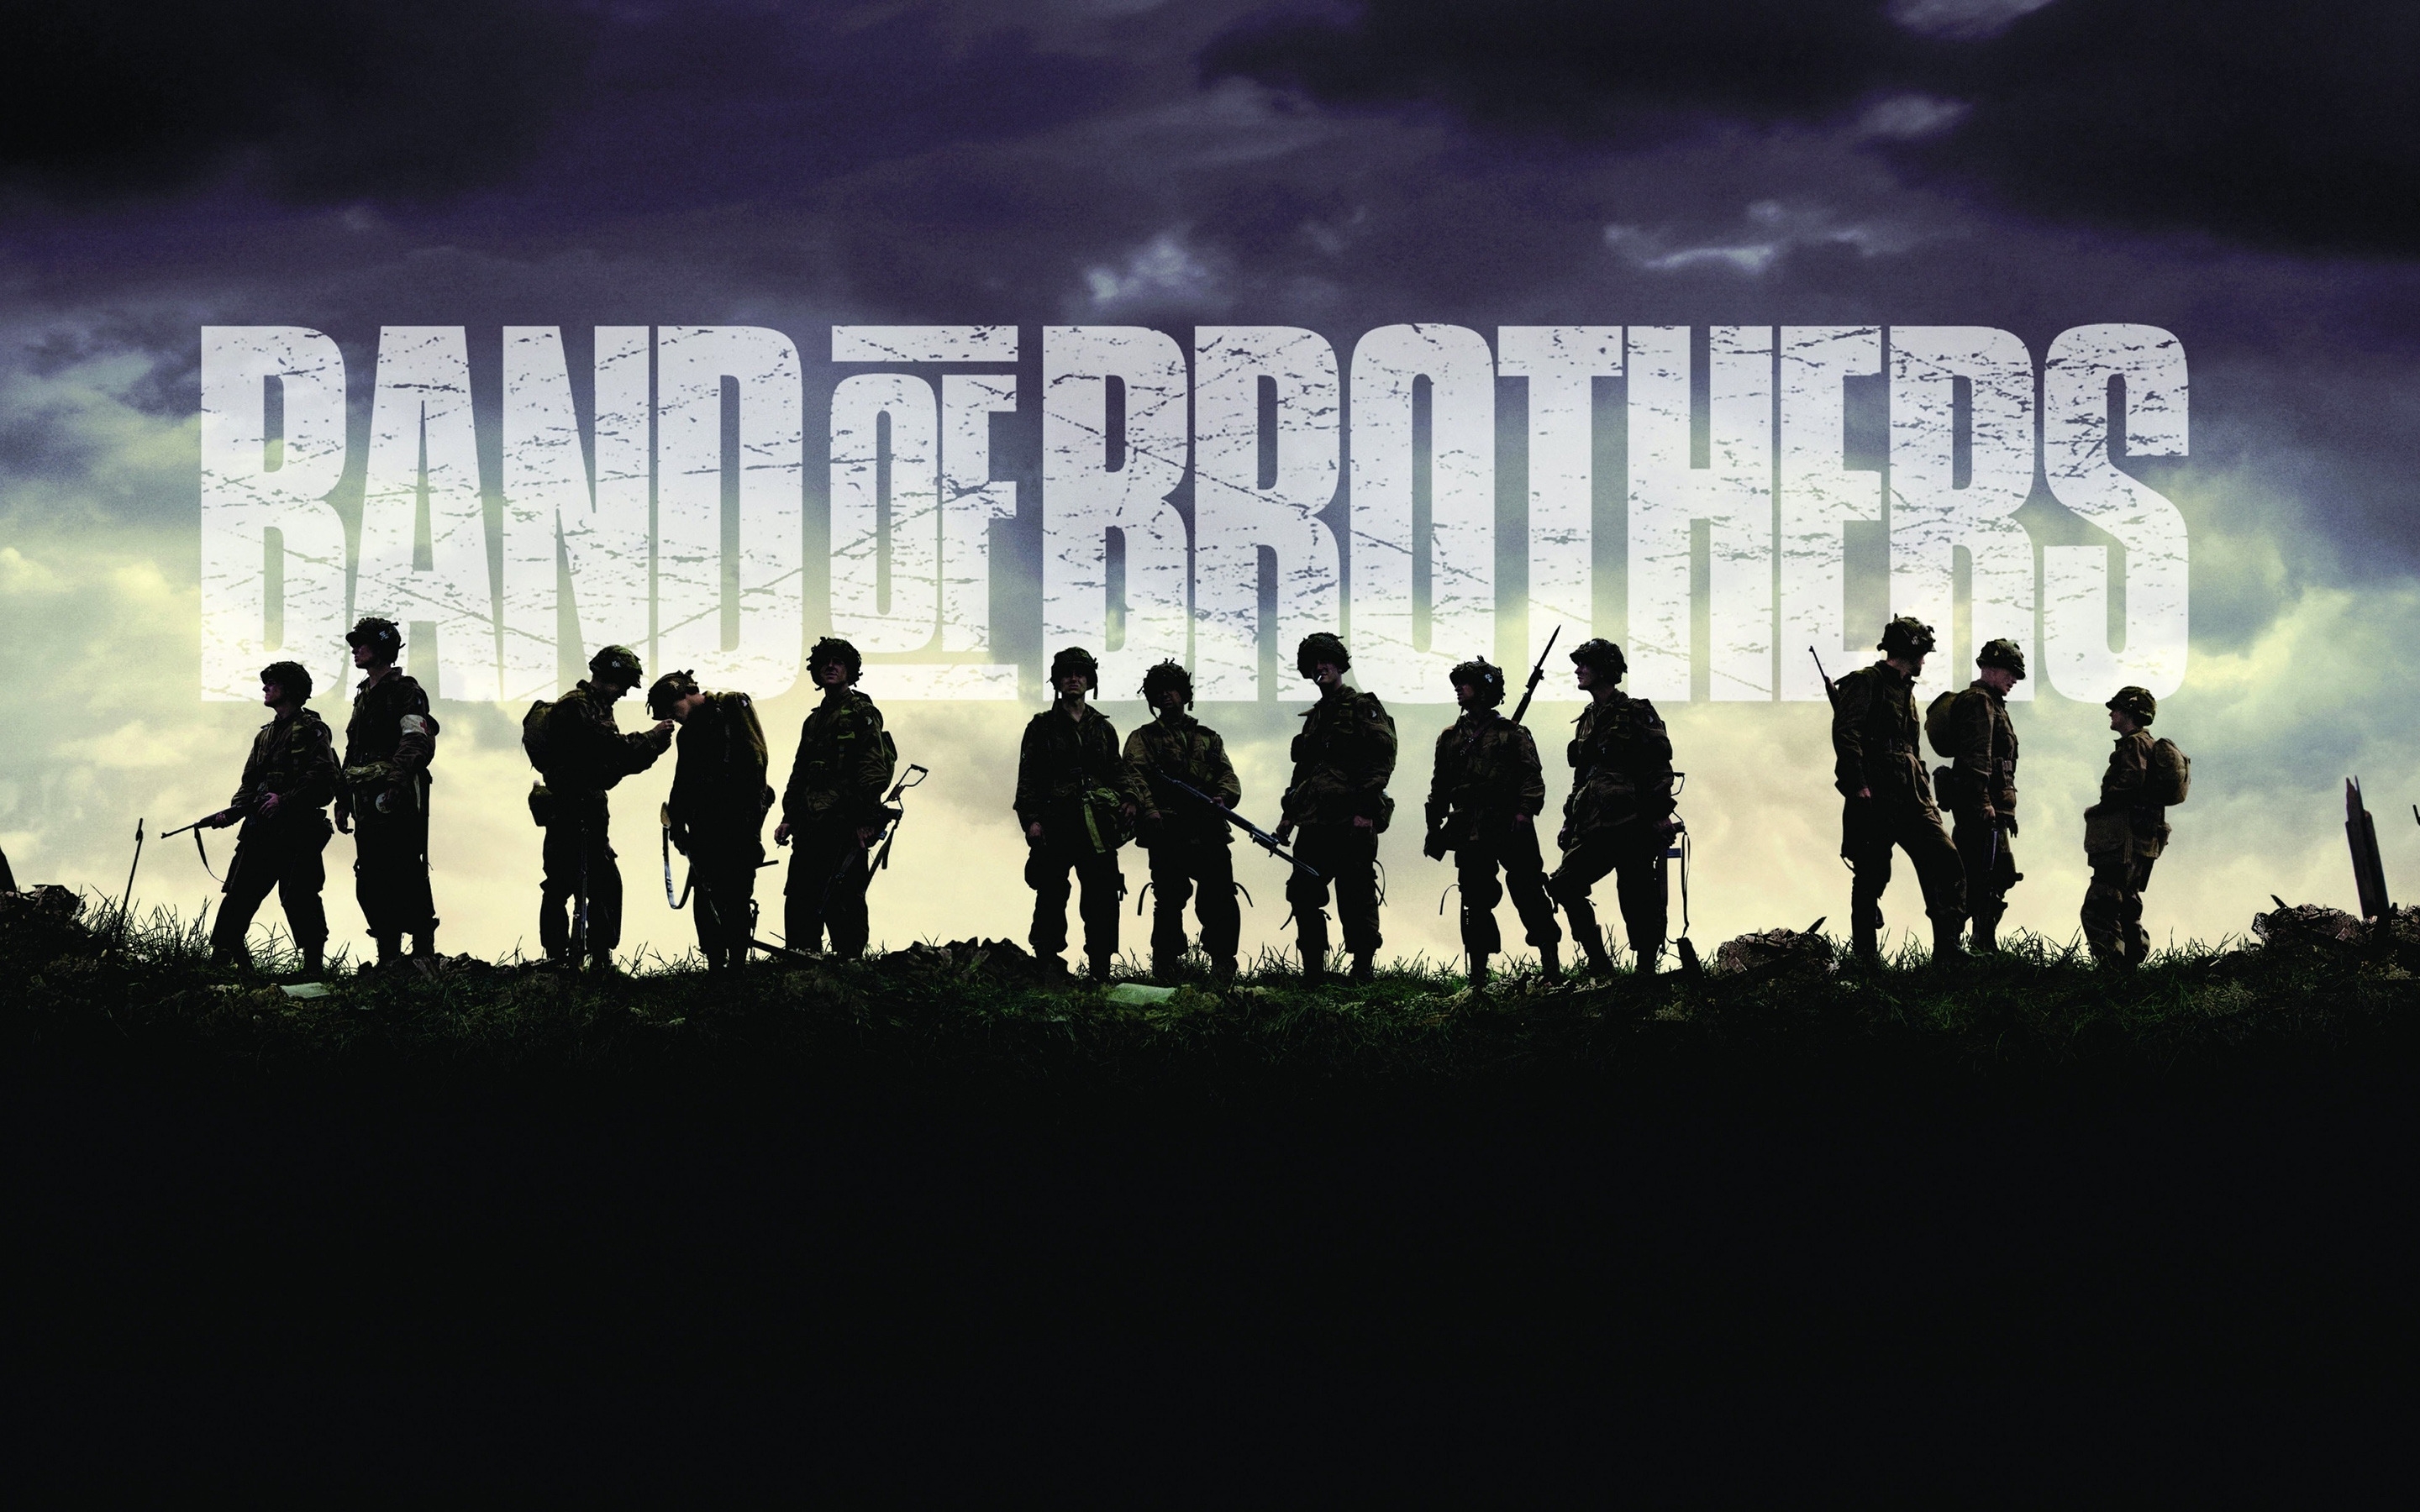 Band of Brothers for 2880 x 1800 Retina Display resolution